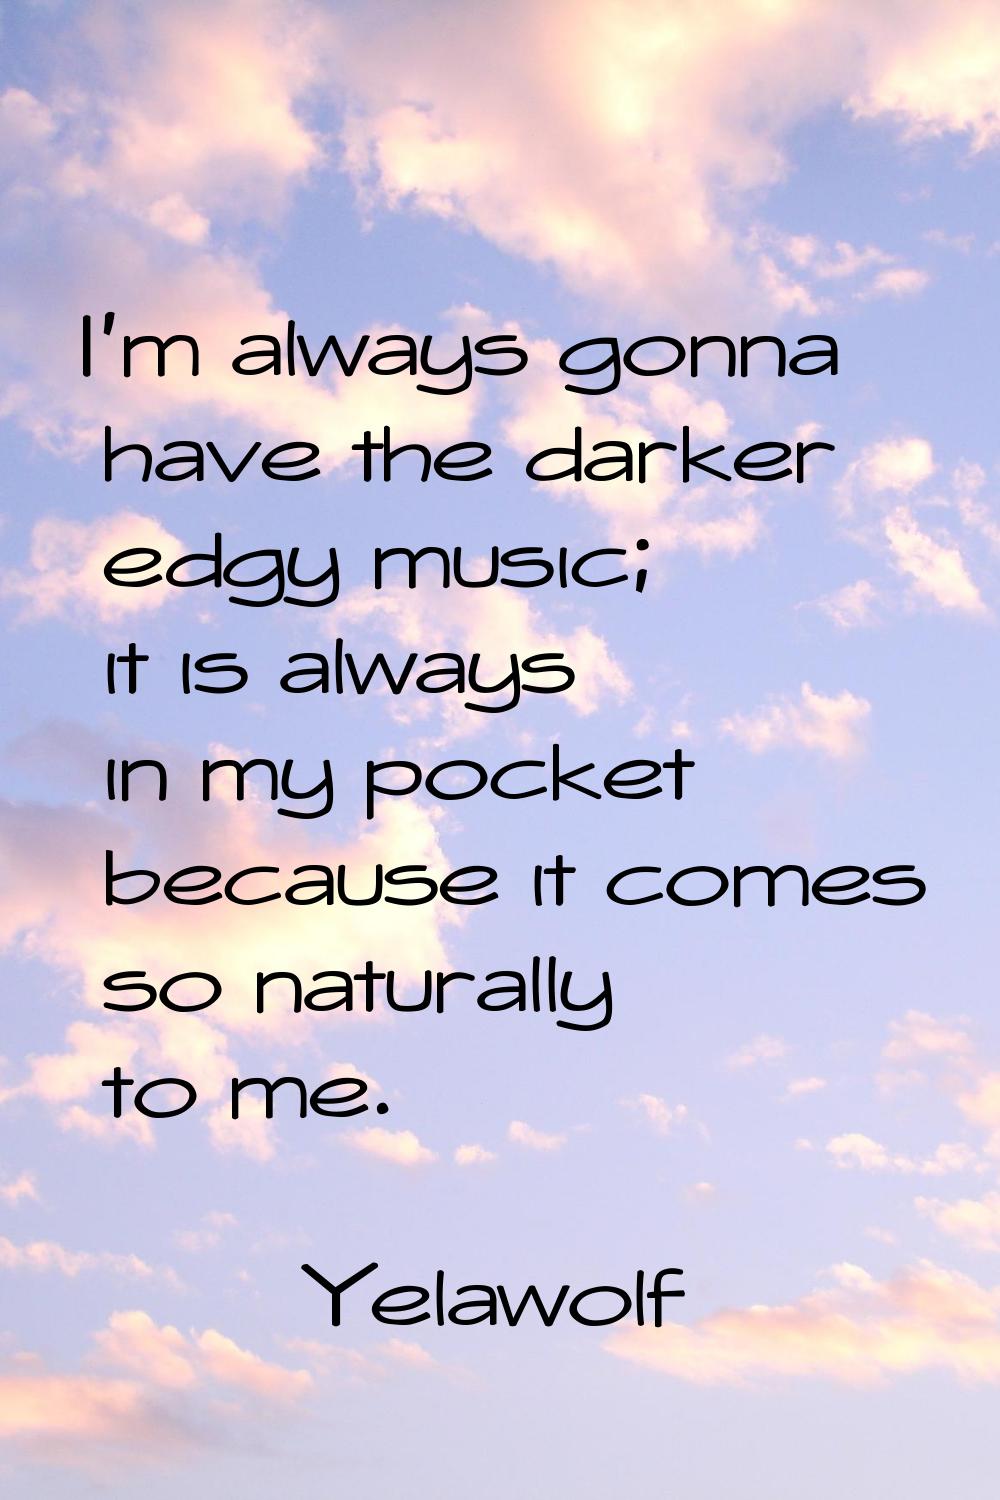 I'm always gonna have the darker edgy music; it is always in my pocket because it comes so naturall